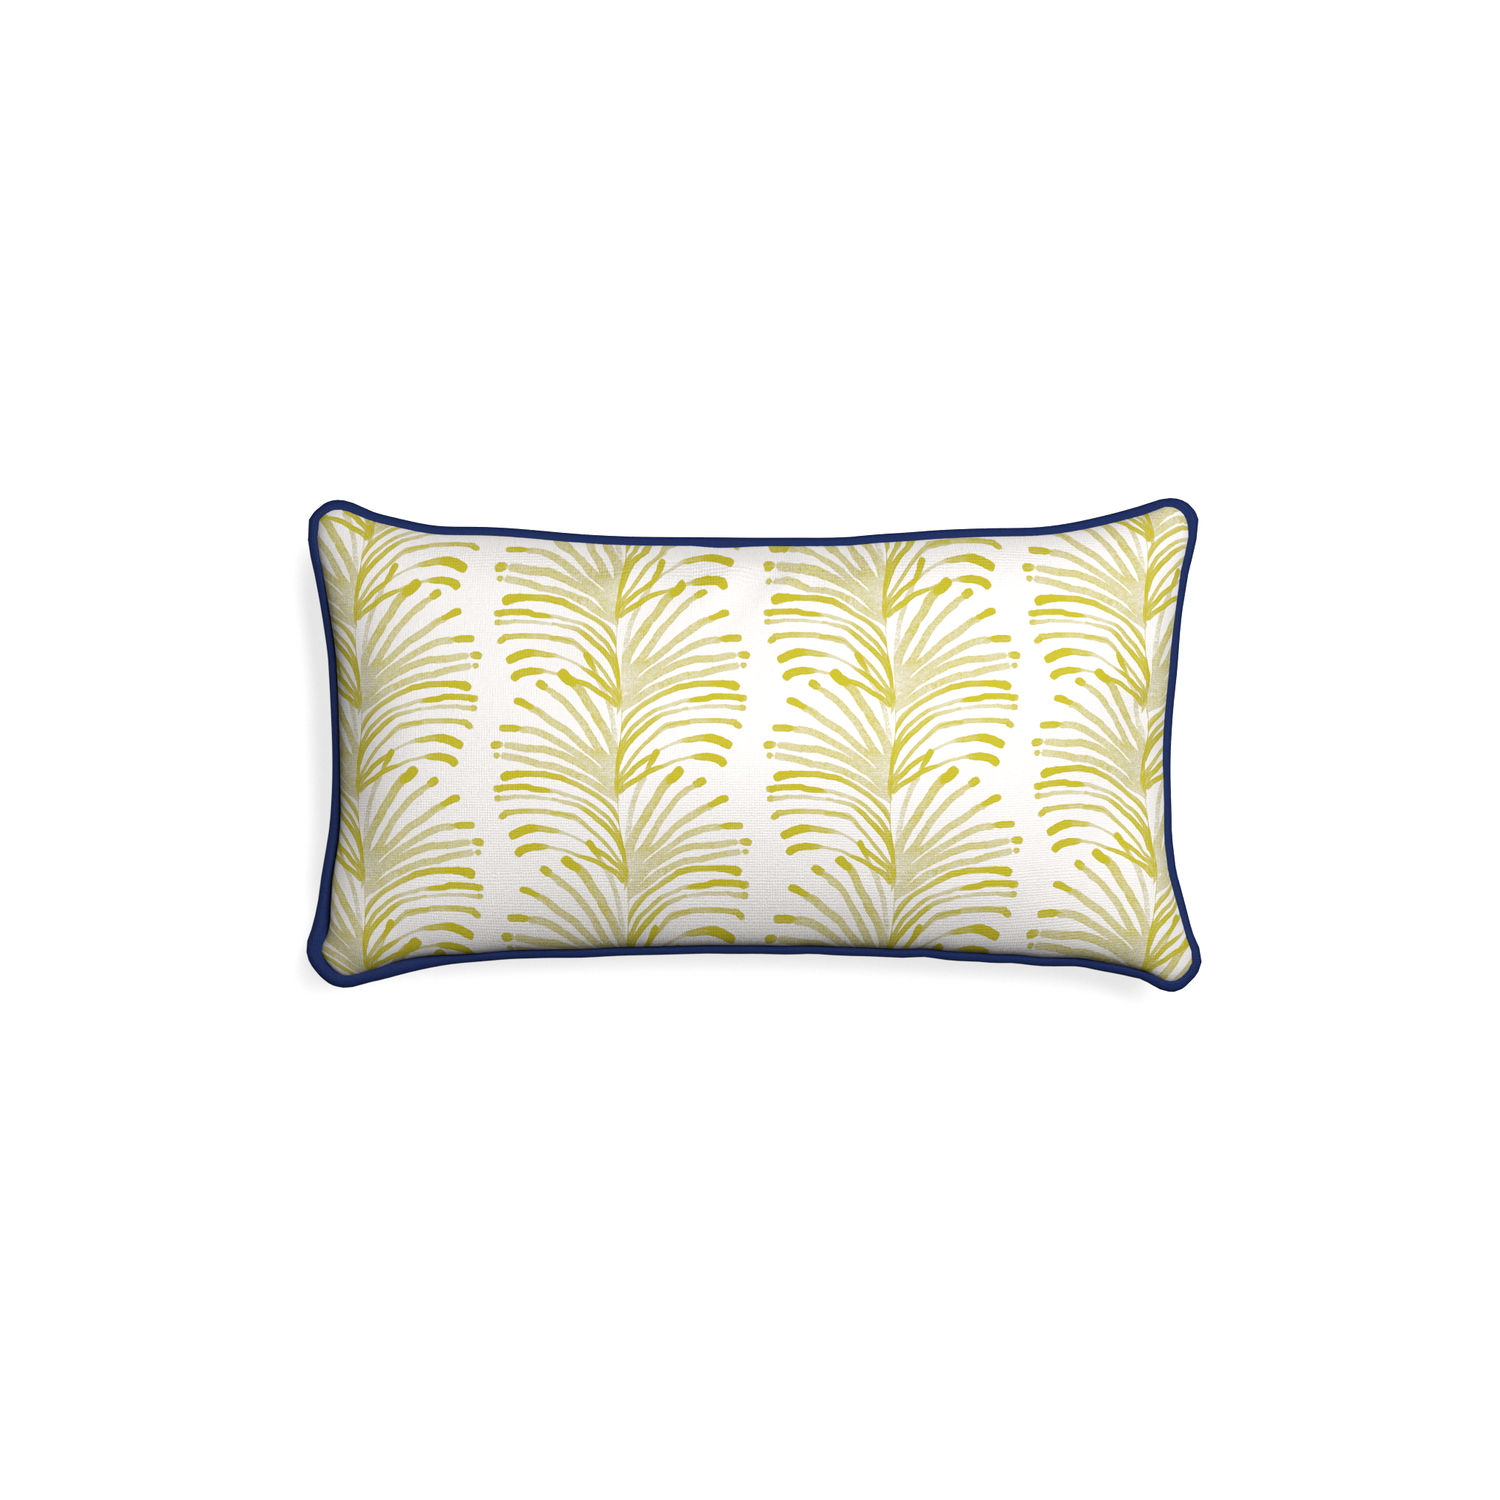 Petite-lumbar emma chartreuse custom yellow stripe chartreusepillow with midnight piping on white background